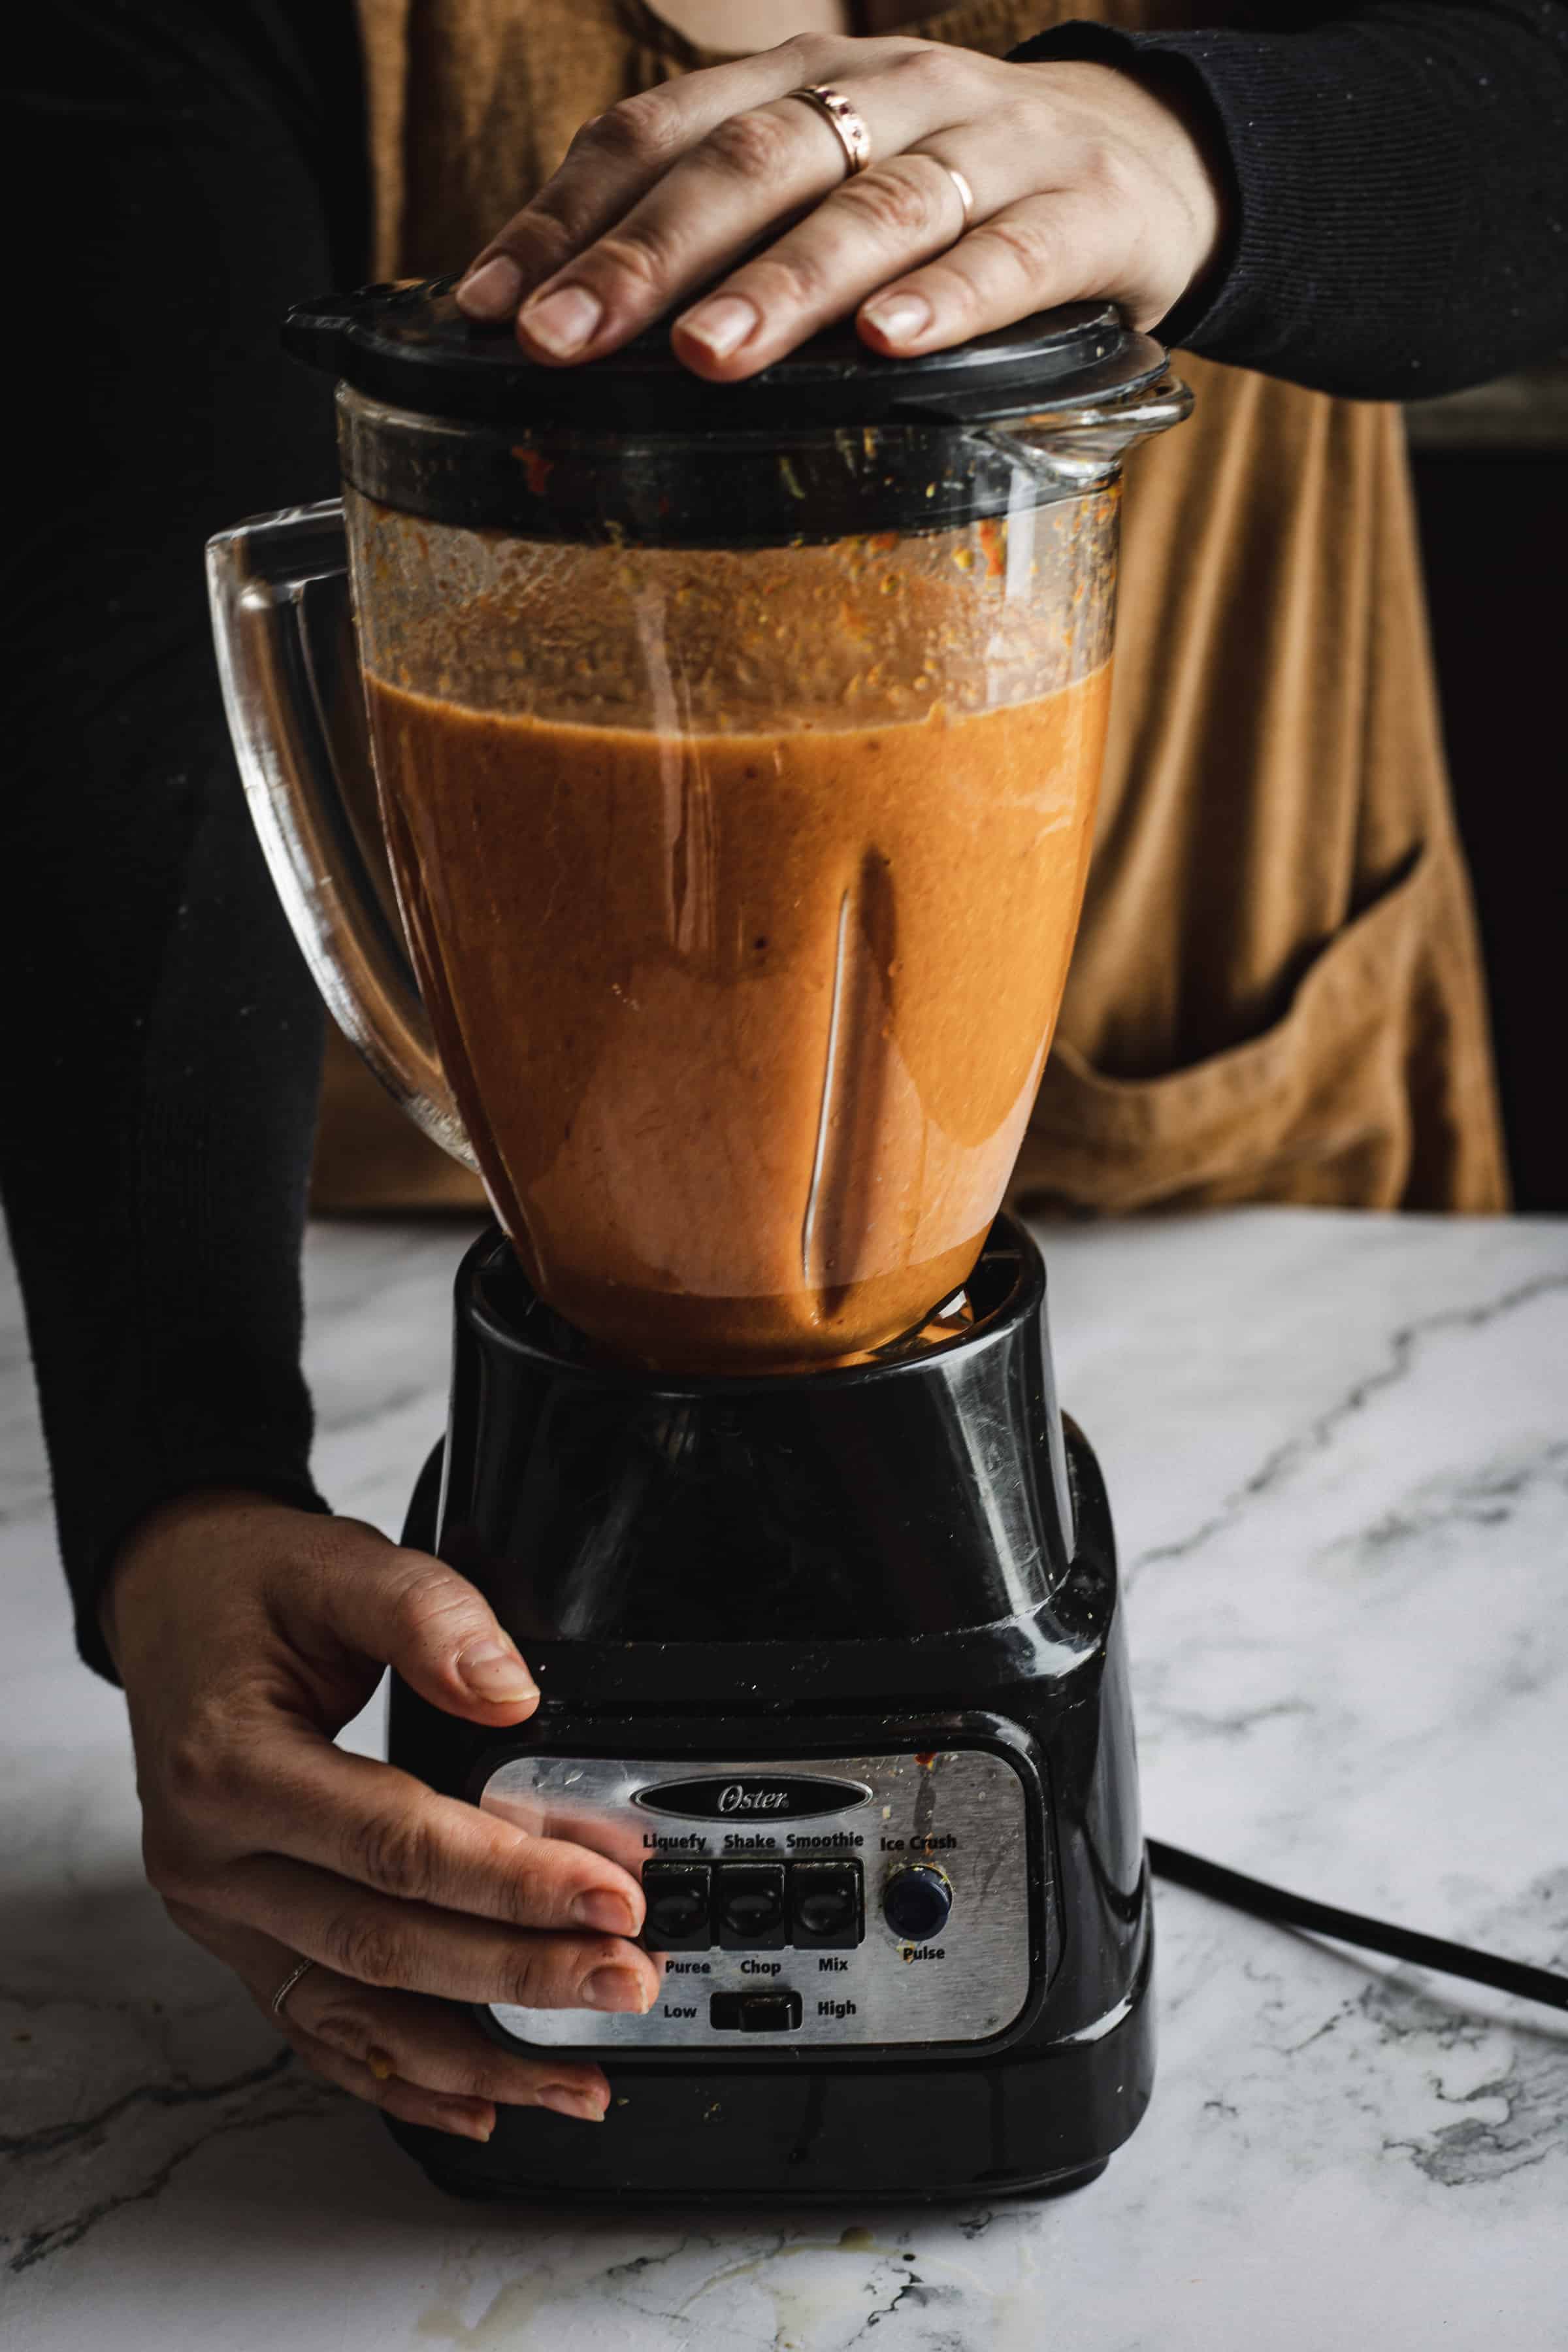 A person in an apron operating a blender filled with a vibrant bell pepper bisque on a marble countertop. Their hands are pressing the lid and selecting settings on the blender.